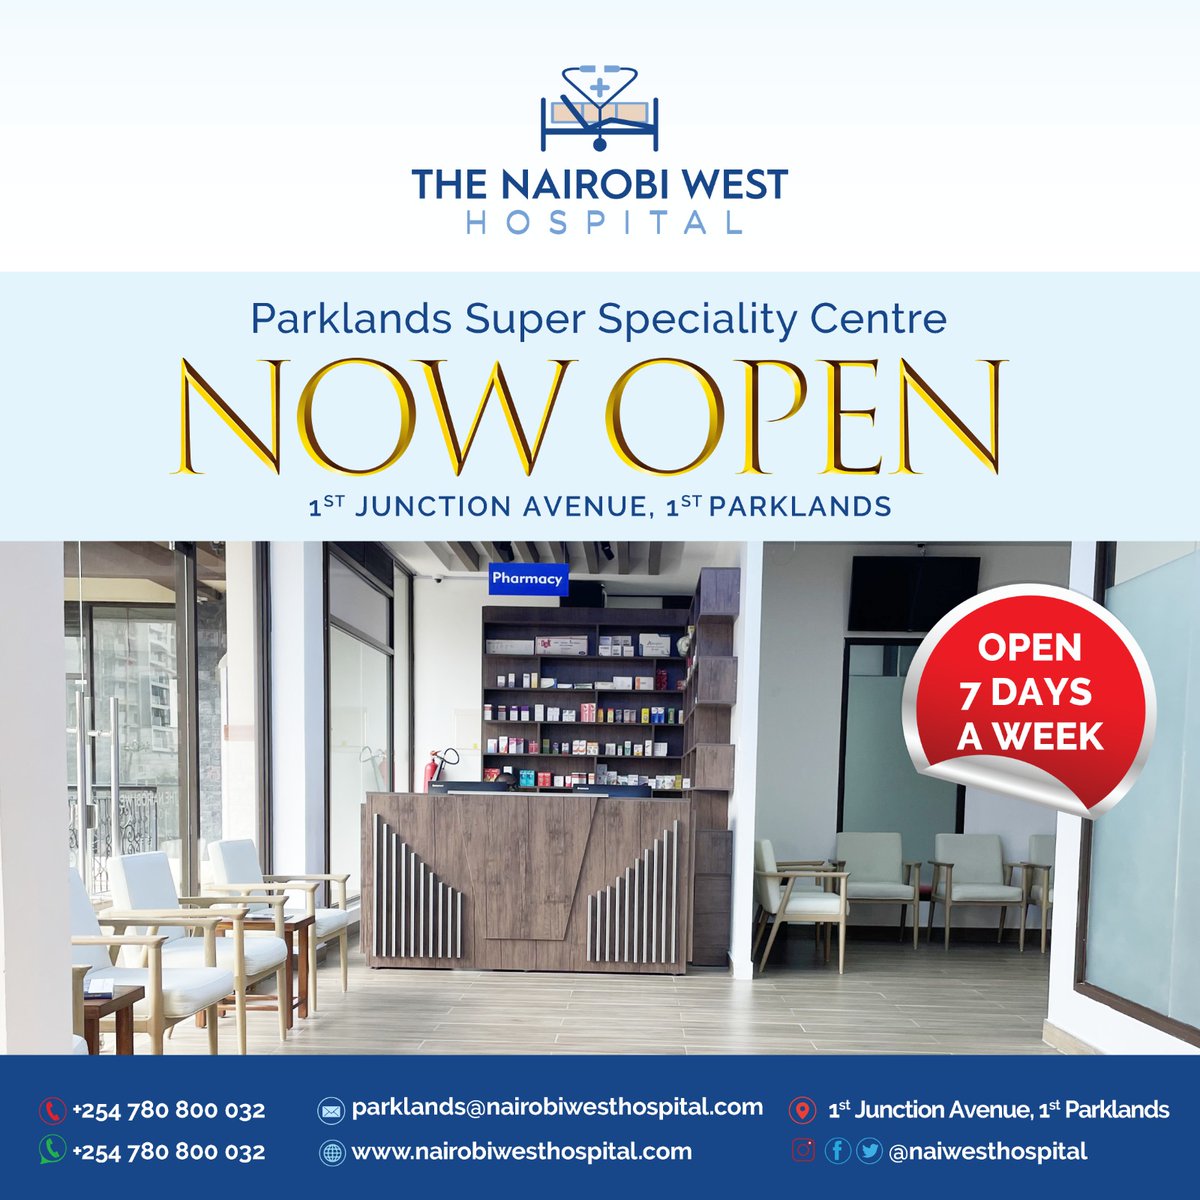 2/...Situated at 1st Junction, 1st Parklands Avenue, the clinic provides world-class outpatient services. Operating hours are Monday to Saturday, 7AM to 7PM, and Sunday, 8AM to 5PM. We eagerly anticipate serving your healthcare needs there! #TheNairobiWestHospital